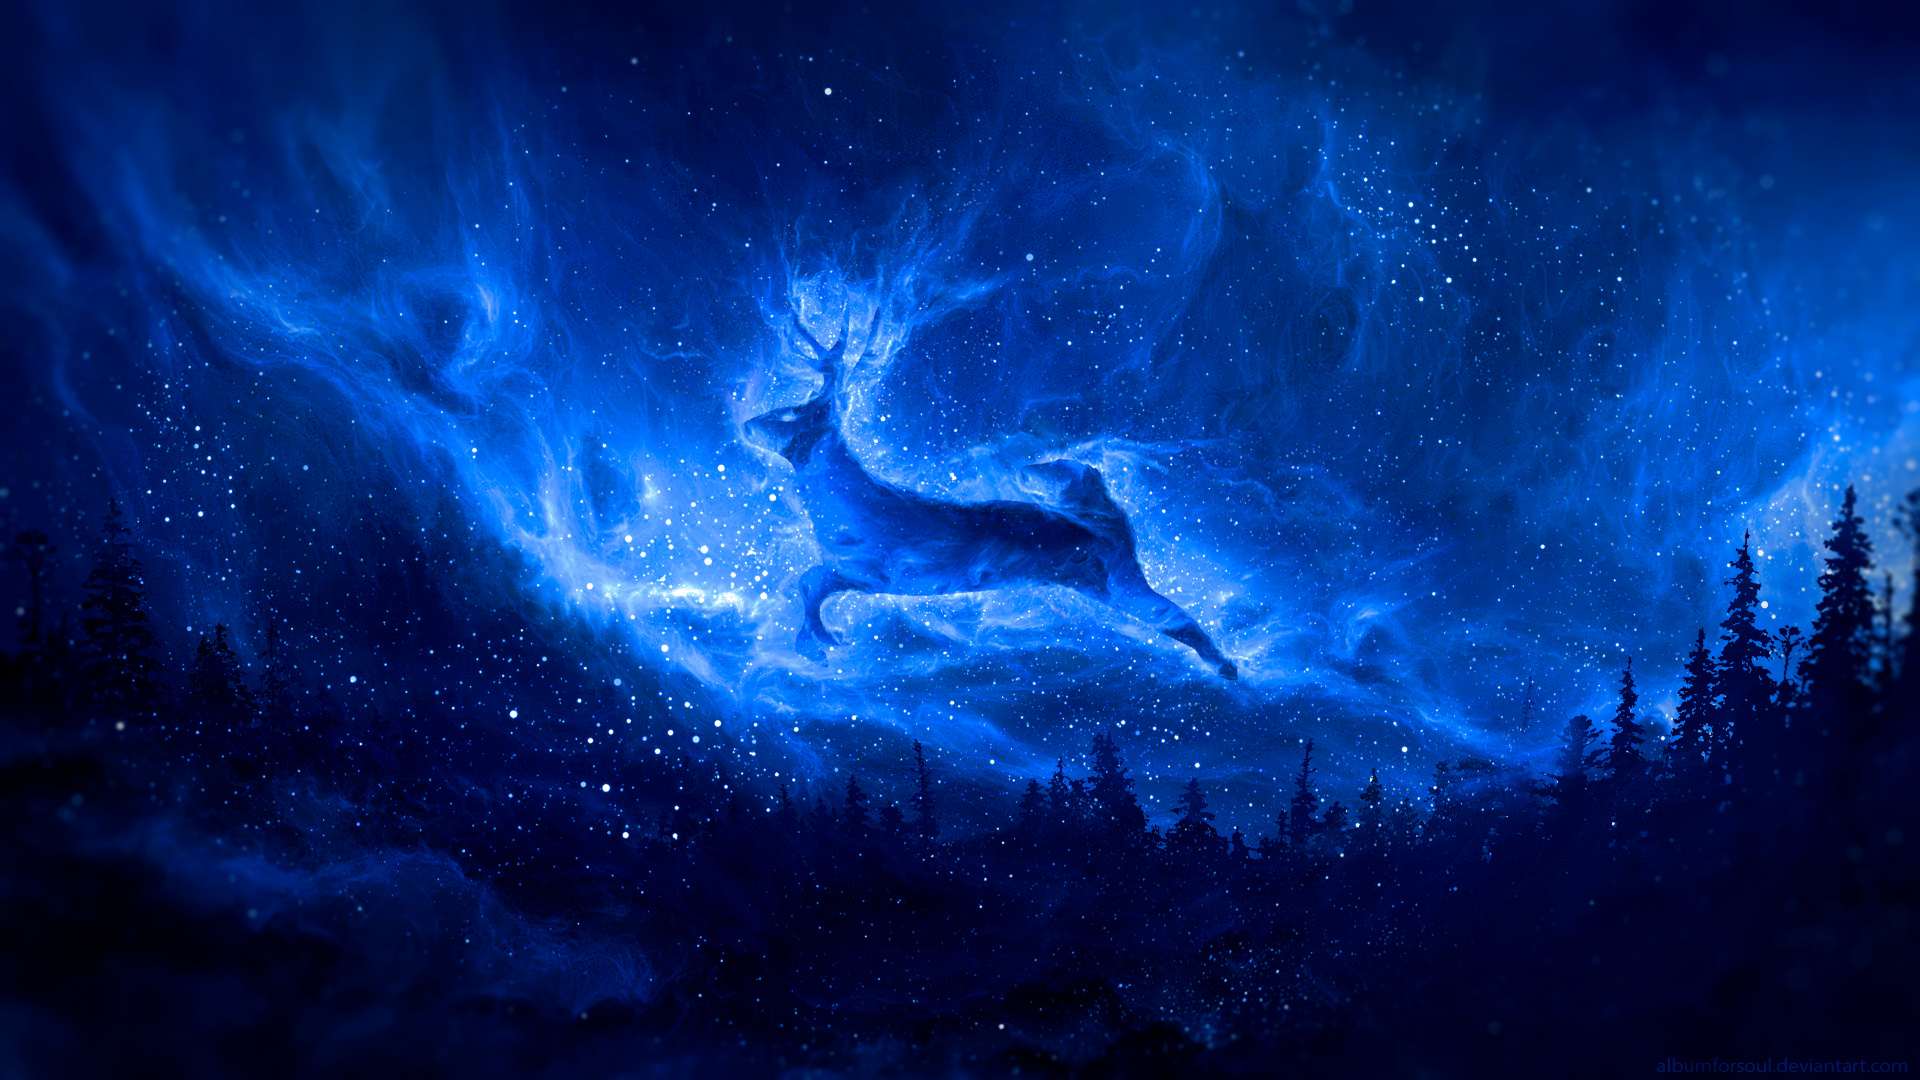 Blue and White Galaxy Illustration. Wallpaper in 1920x1080 Resolution